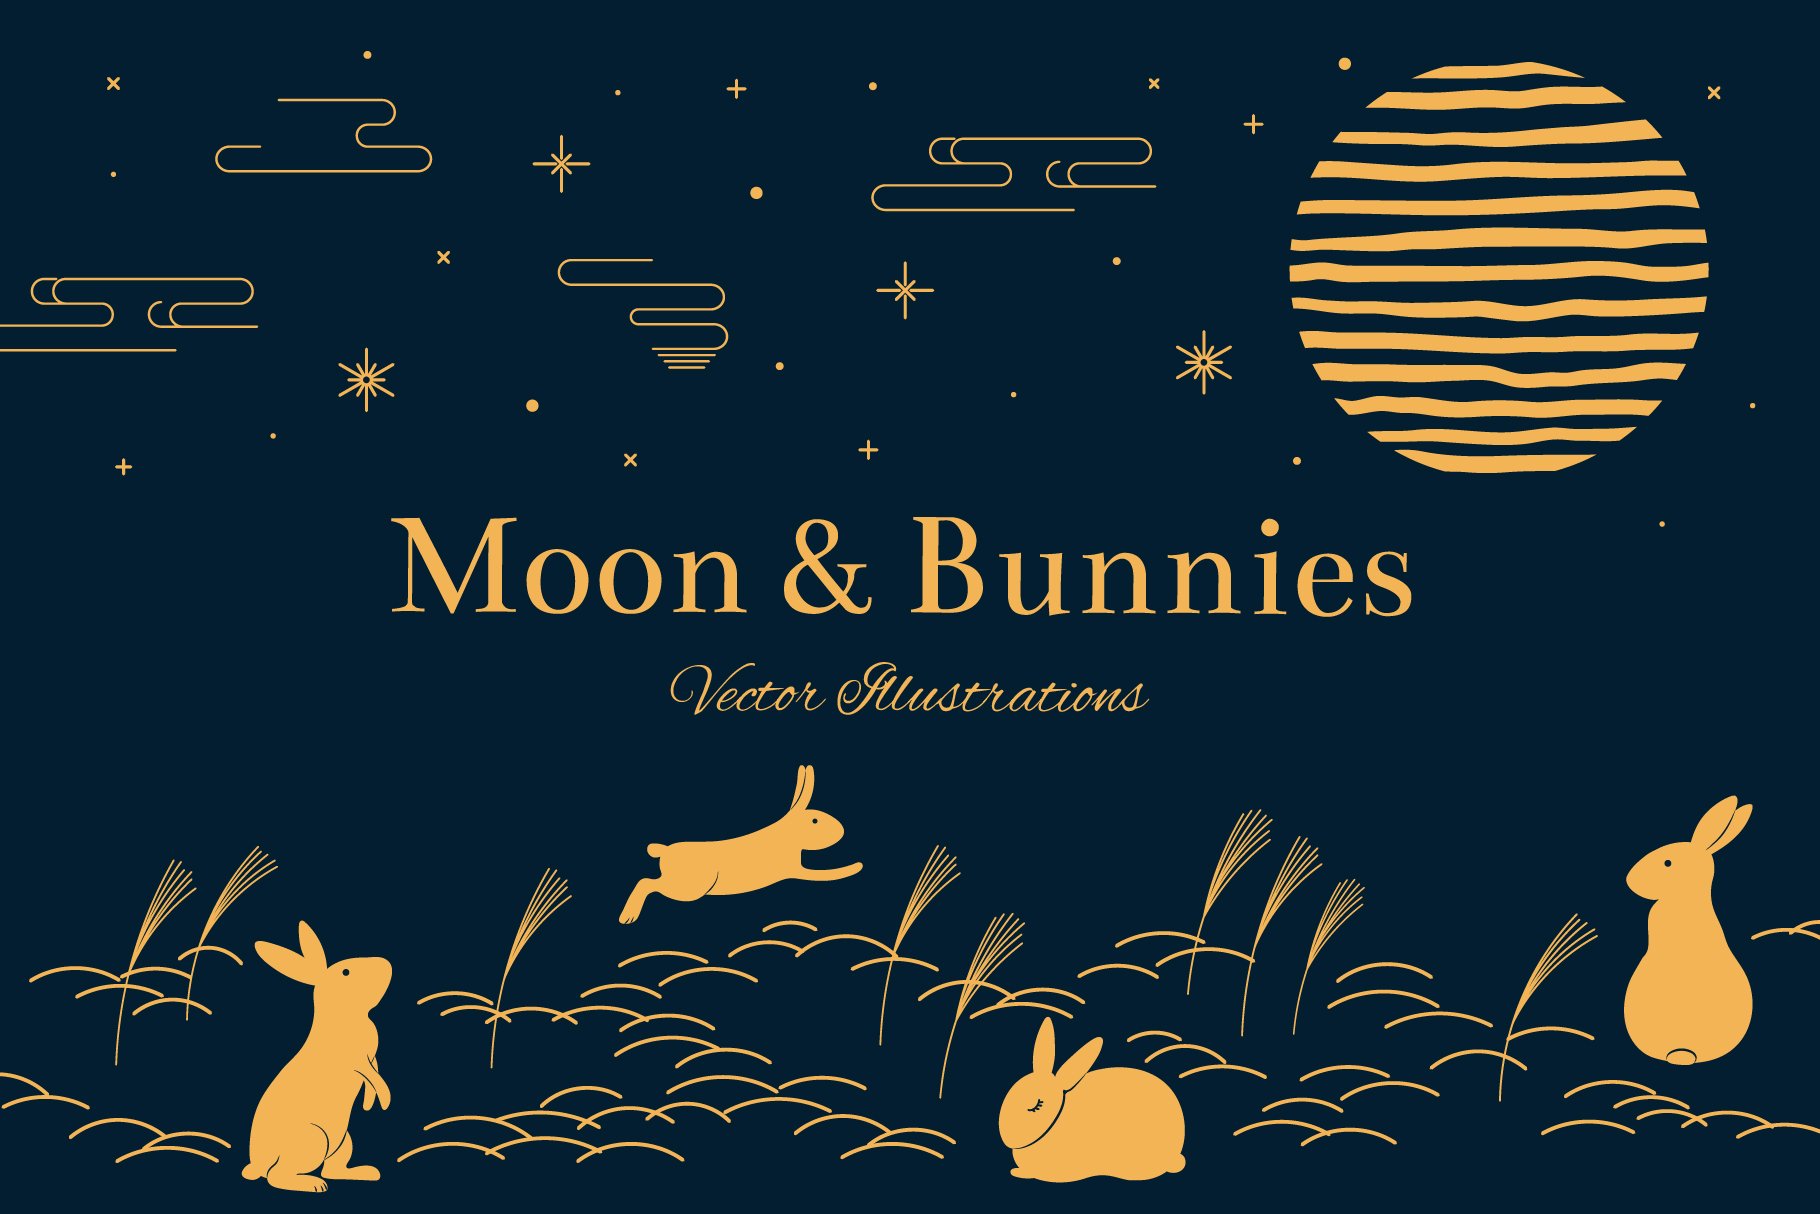 Moon & Bunnies Vector Illustrations cover image.